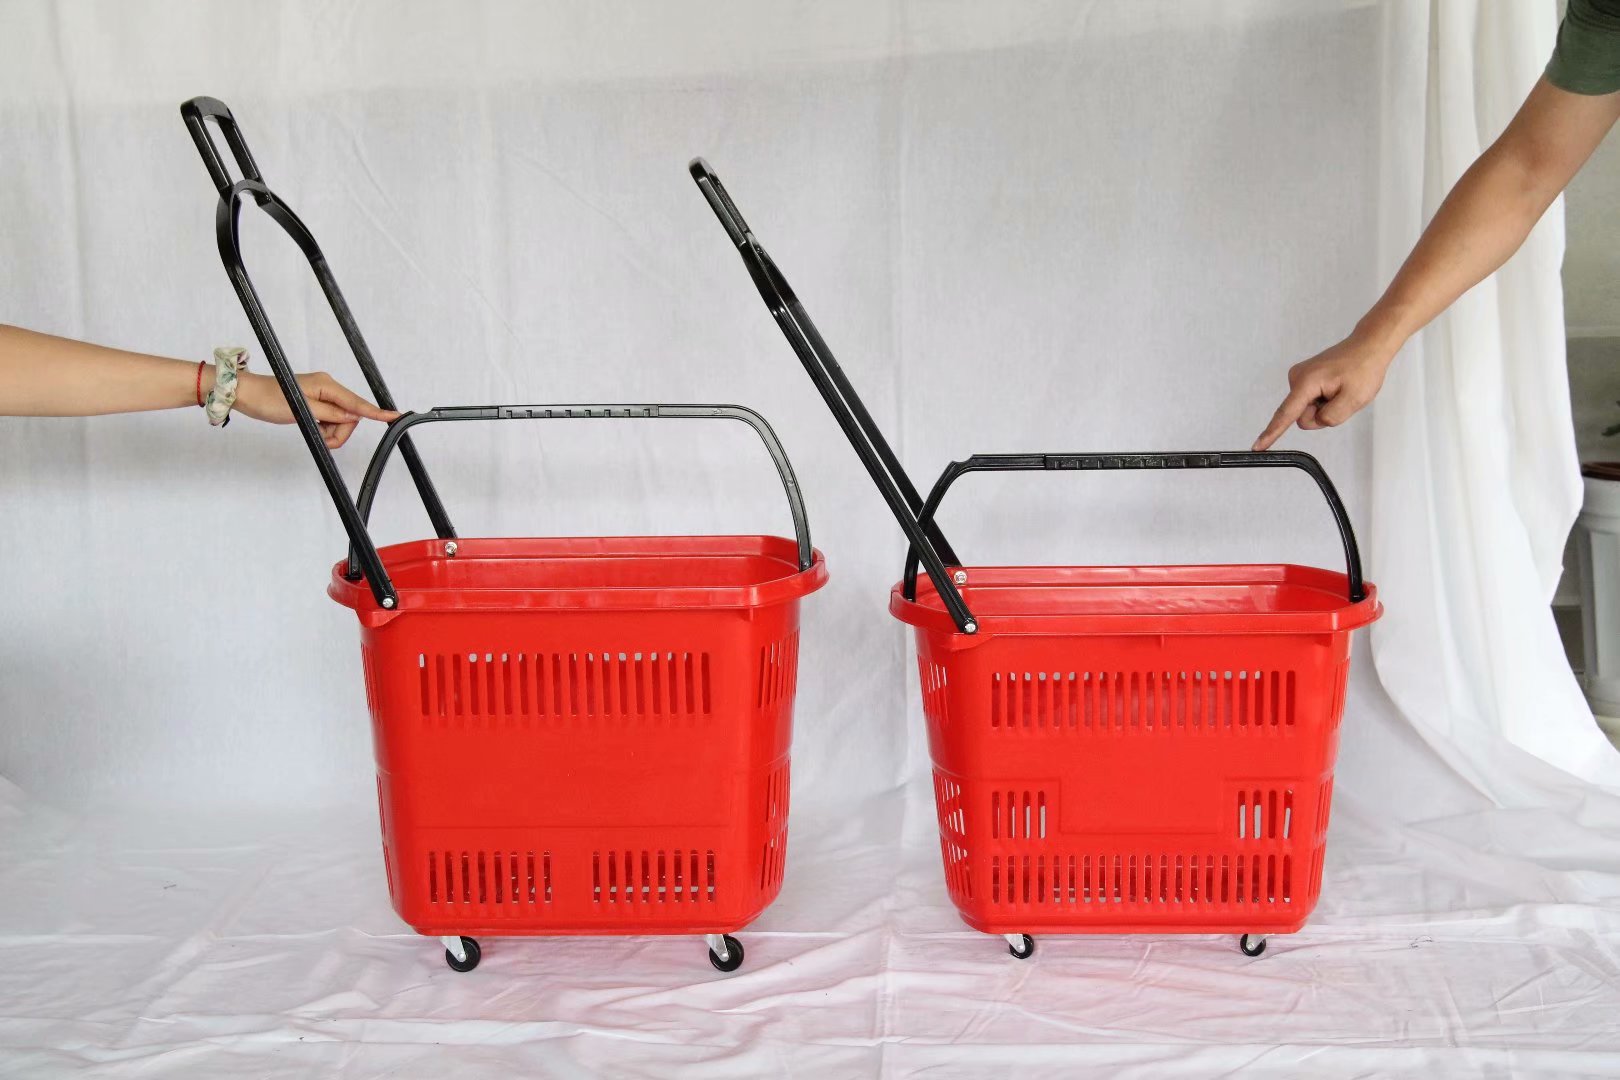 Maximizing Convenience: The Advantages of Plastic Retail Shopping Baskets